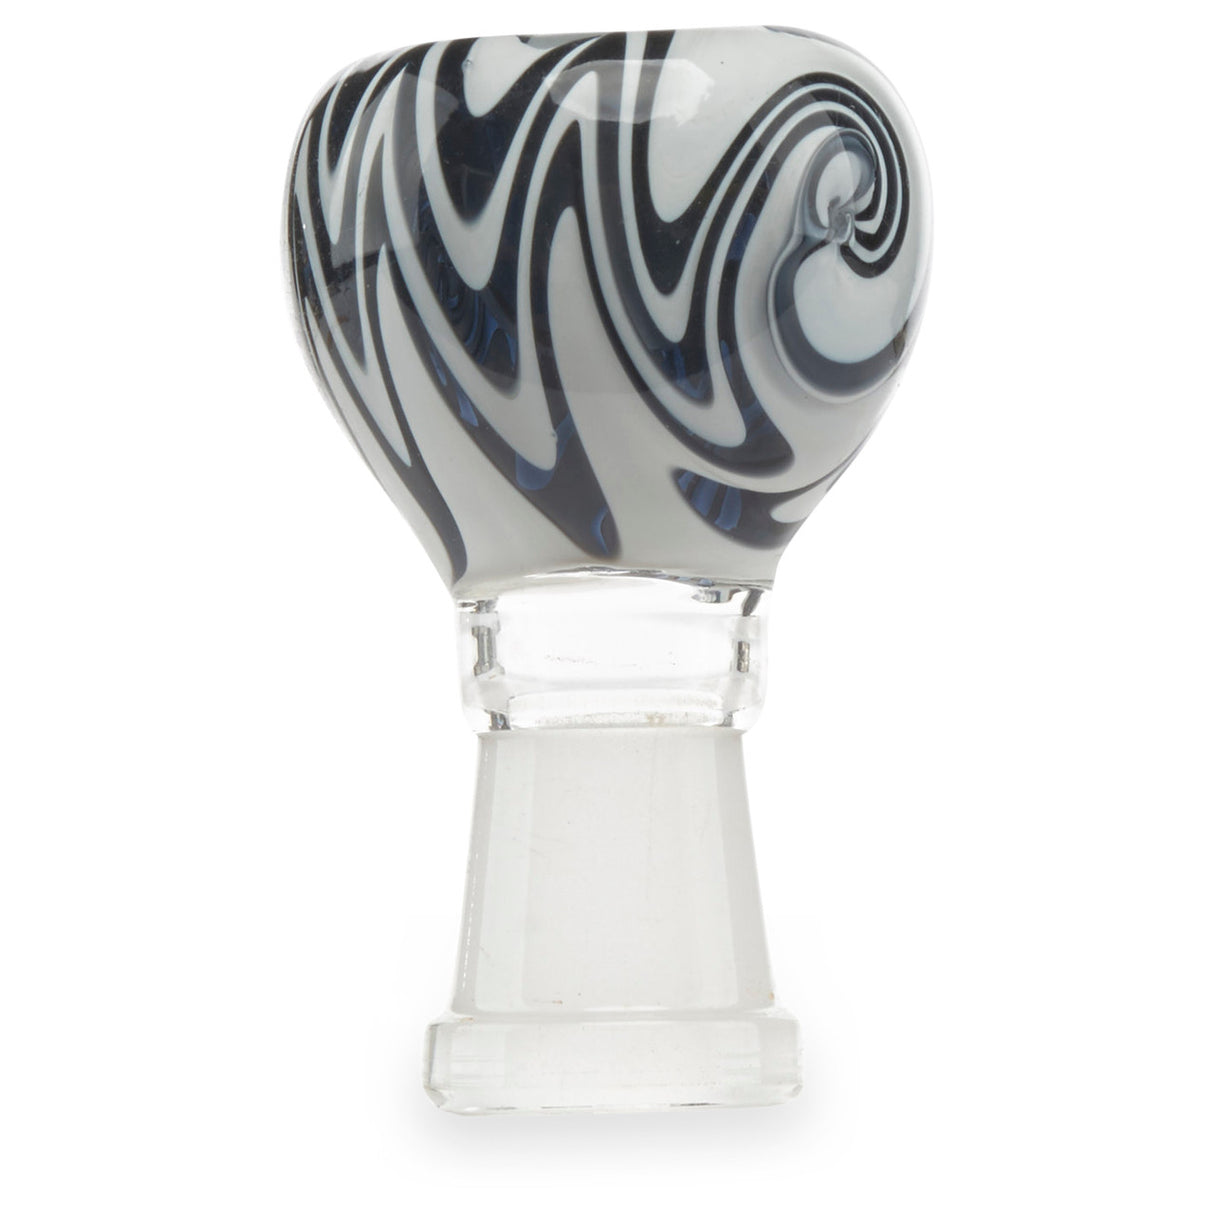 hand blown reverse slides 14mm female joint on sale $14.99